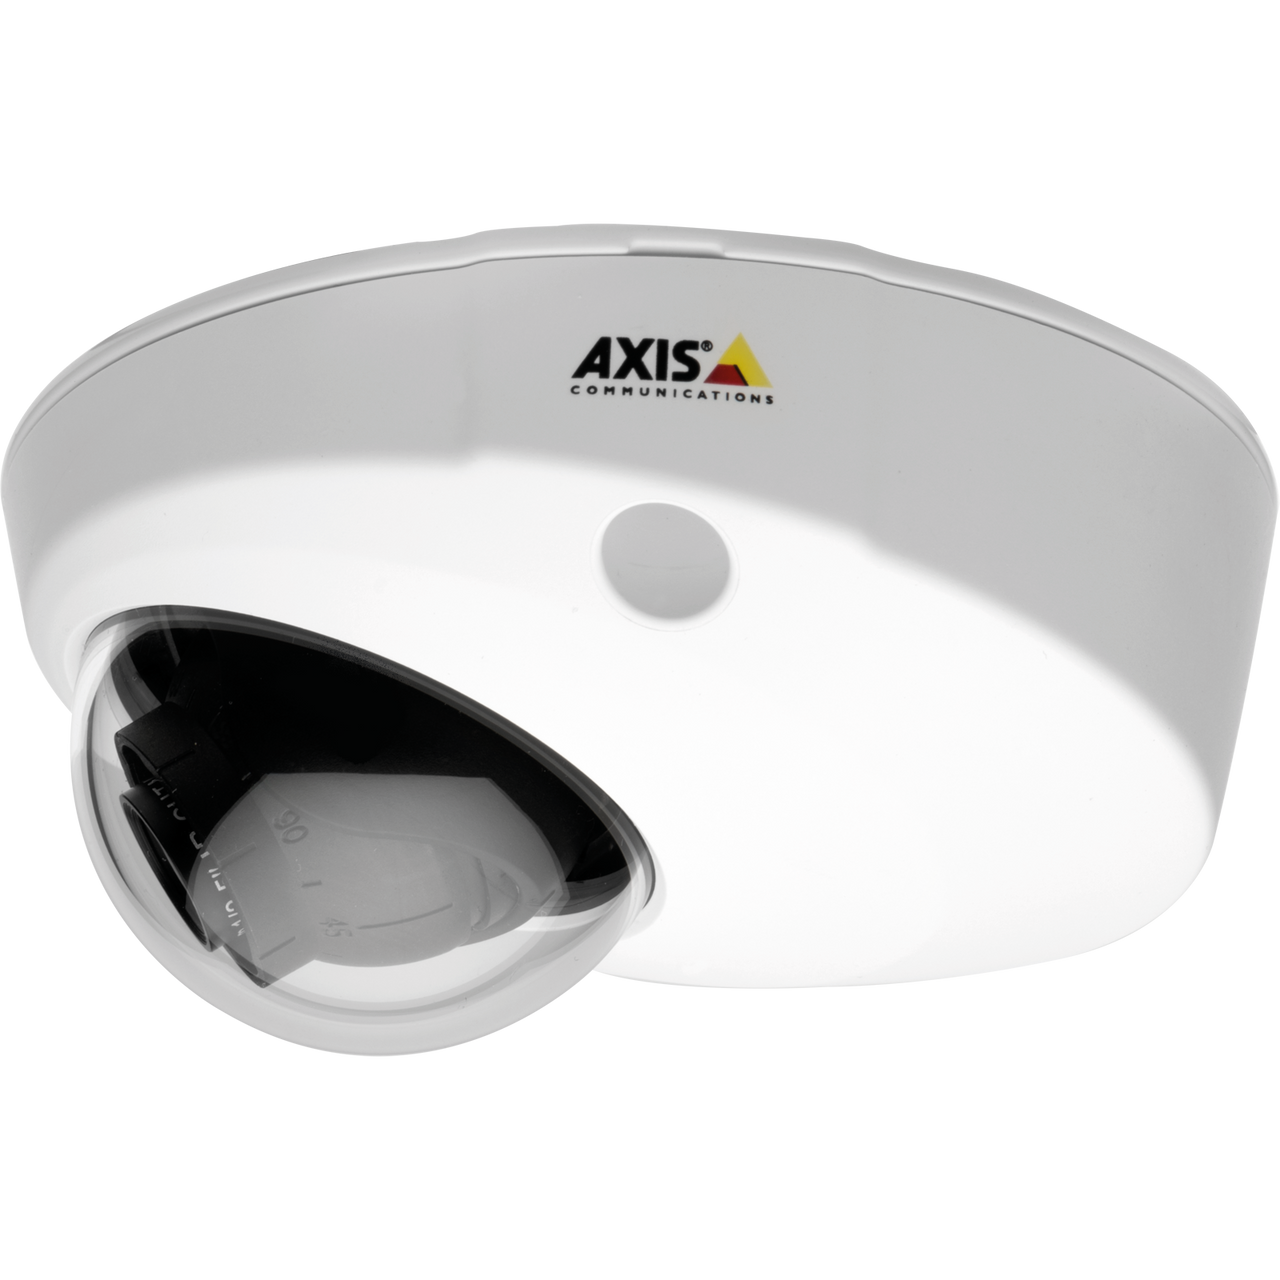 AXIS P3904-R Mk II M12 Onboard HDTV 720p surveillance with Zipstream